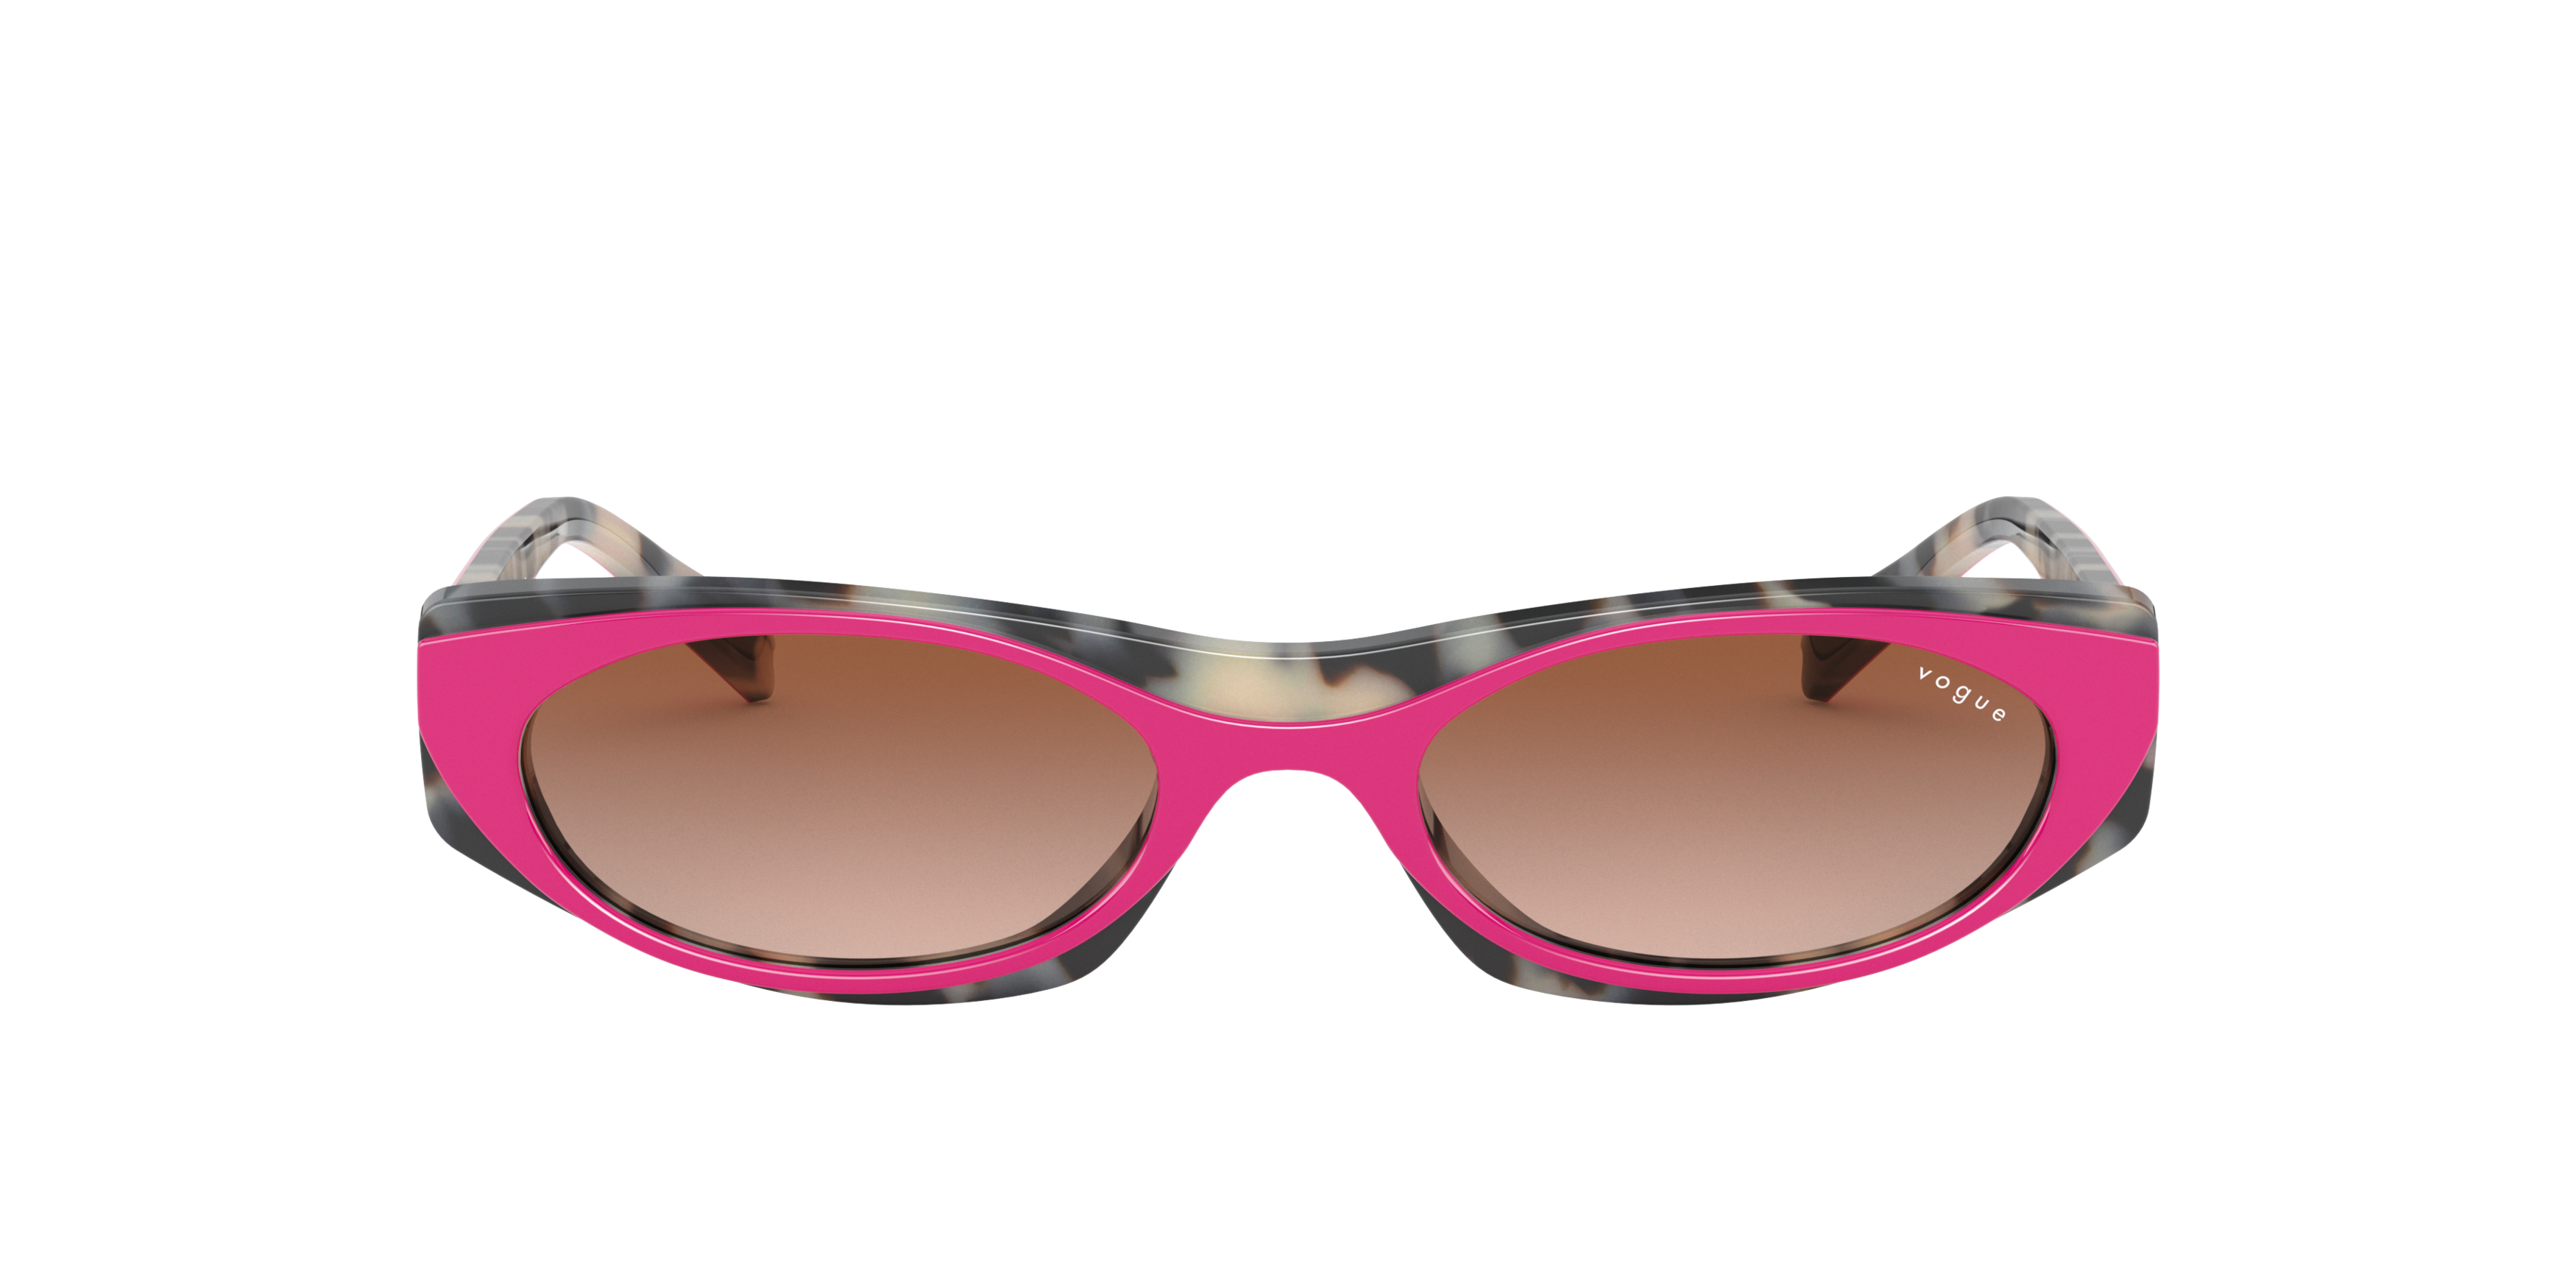 Front Vogue MBB x VO 5316S Sunglasses Brown / Pink